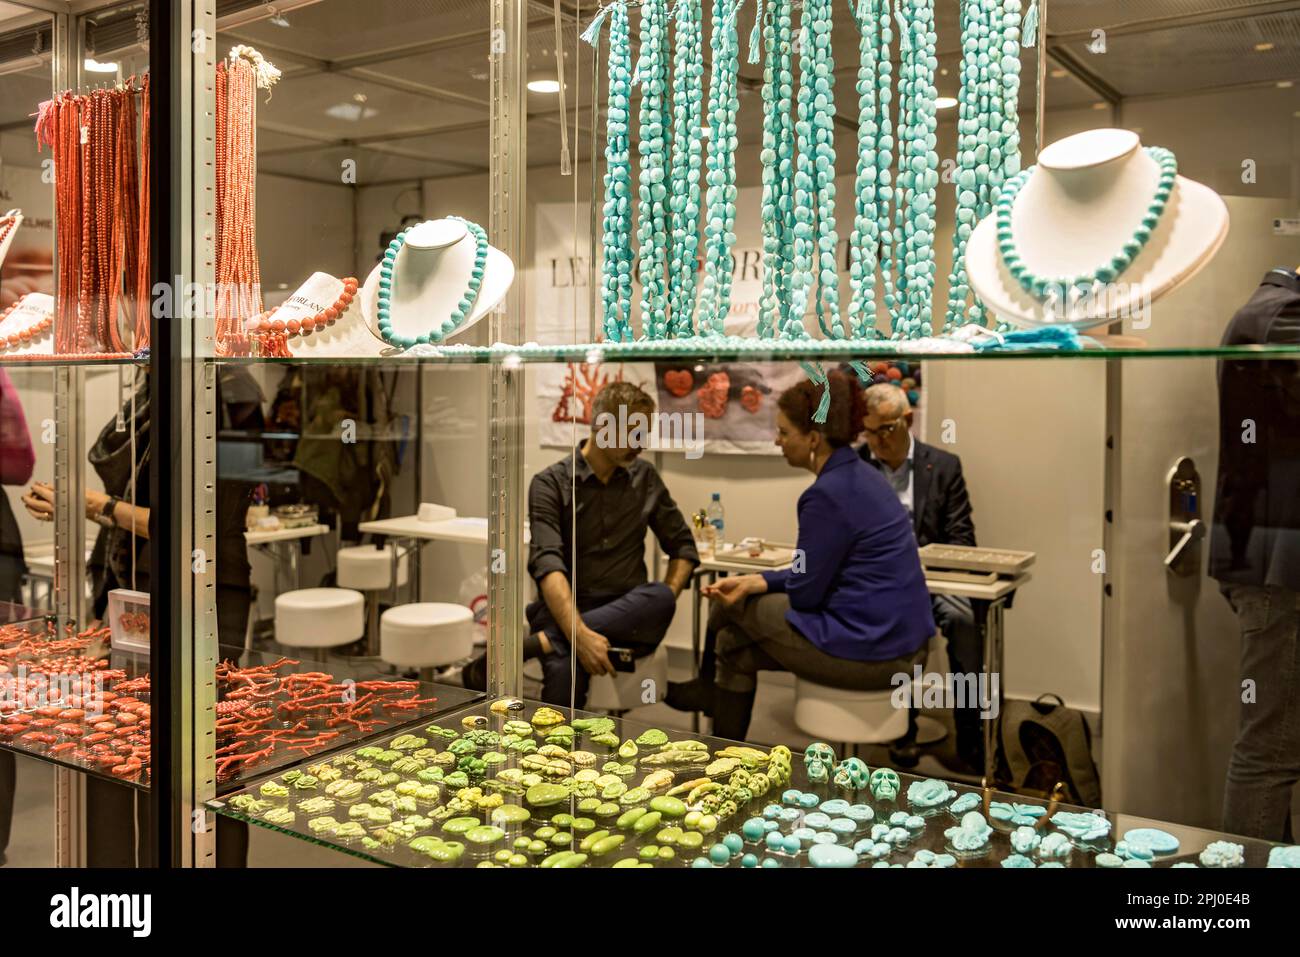 Showcase with costume jewellery made of gemstones, coral, turquoise, Lello  Orlando Coral & Turquoise Factory trade fair stand, Inhorgenta, trade fair  Stock Photo - Alamy